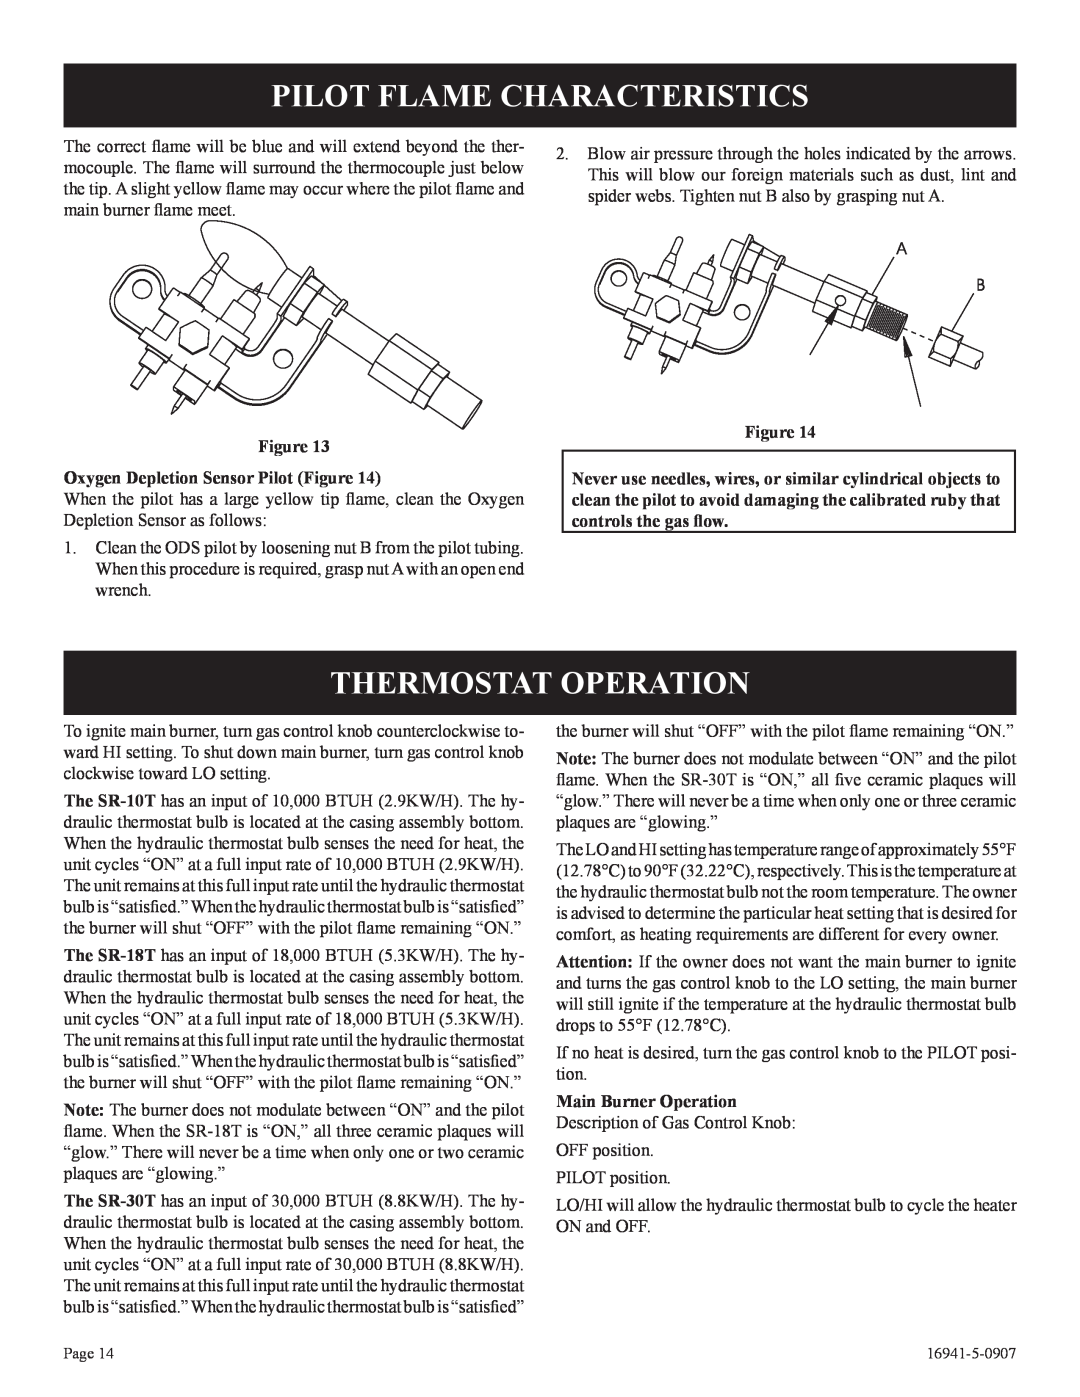 Empire Comfort Systems SR-10T-3 installation instructions Pilot Flame Characteristics, Thermostat Operation 